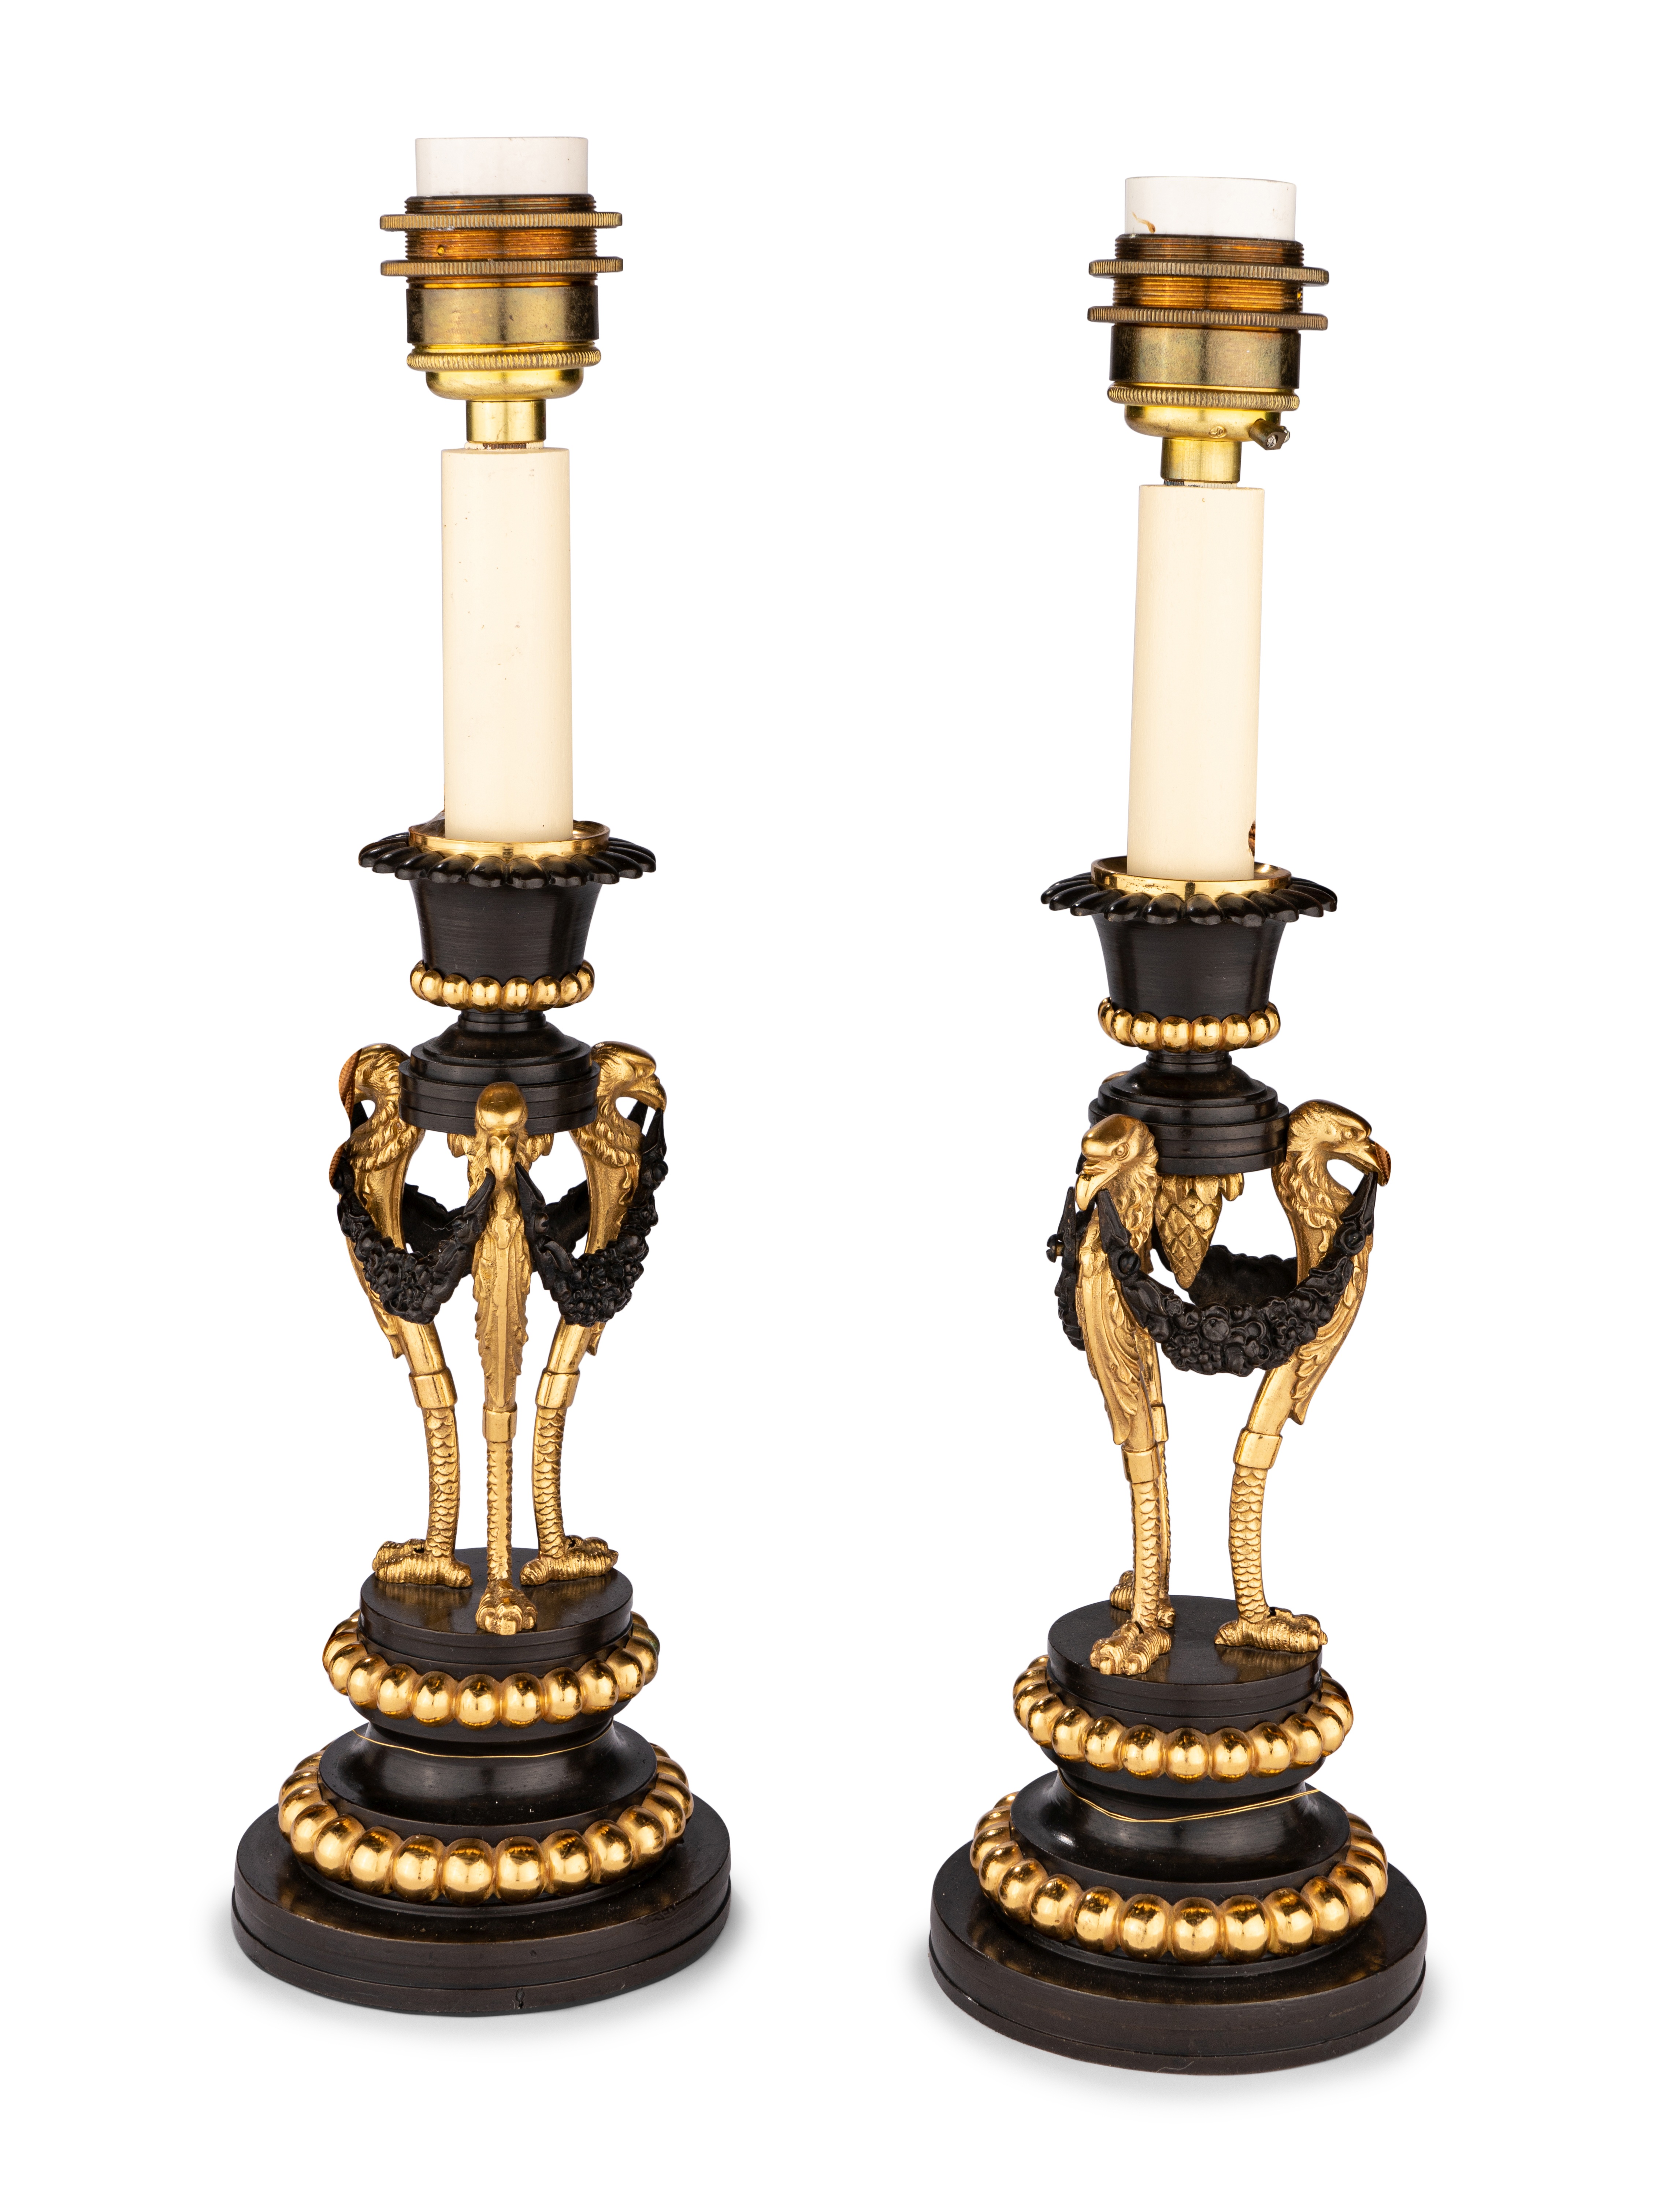 A Pair of Directoire Parcel-Gilt Bronze Candlesticks - Image 3 of 7